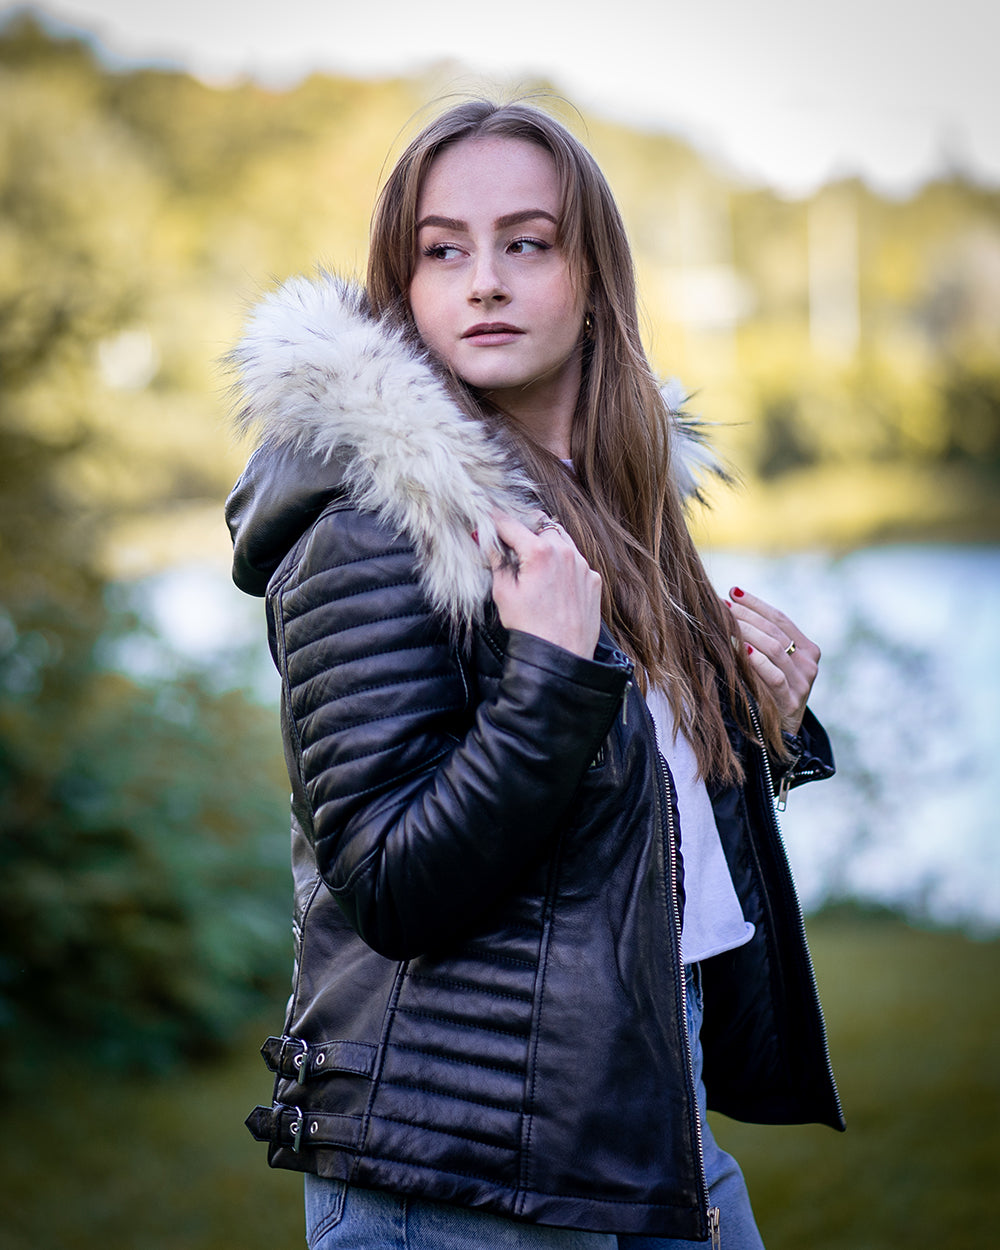 Larissa's Black Leather Jacket with Hoodie and Fur Trim